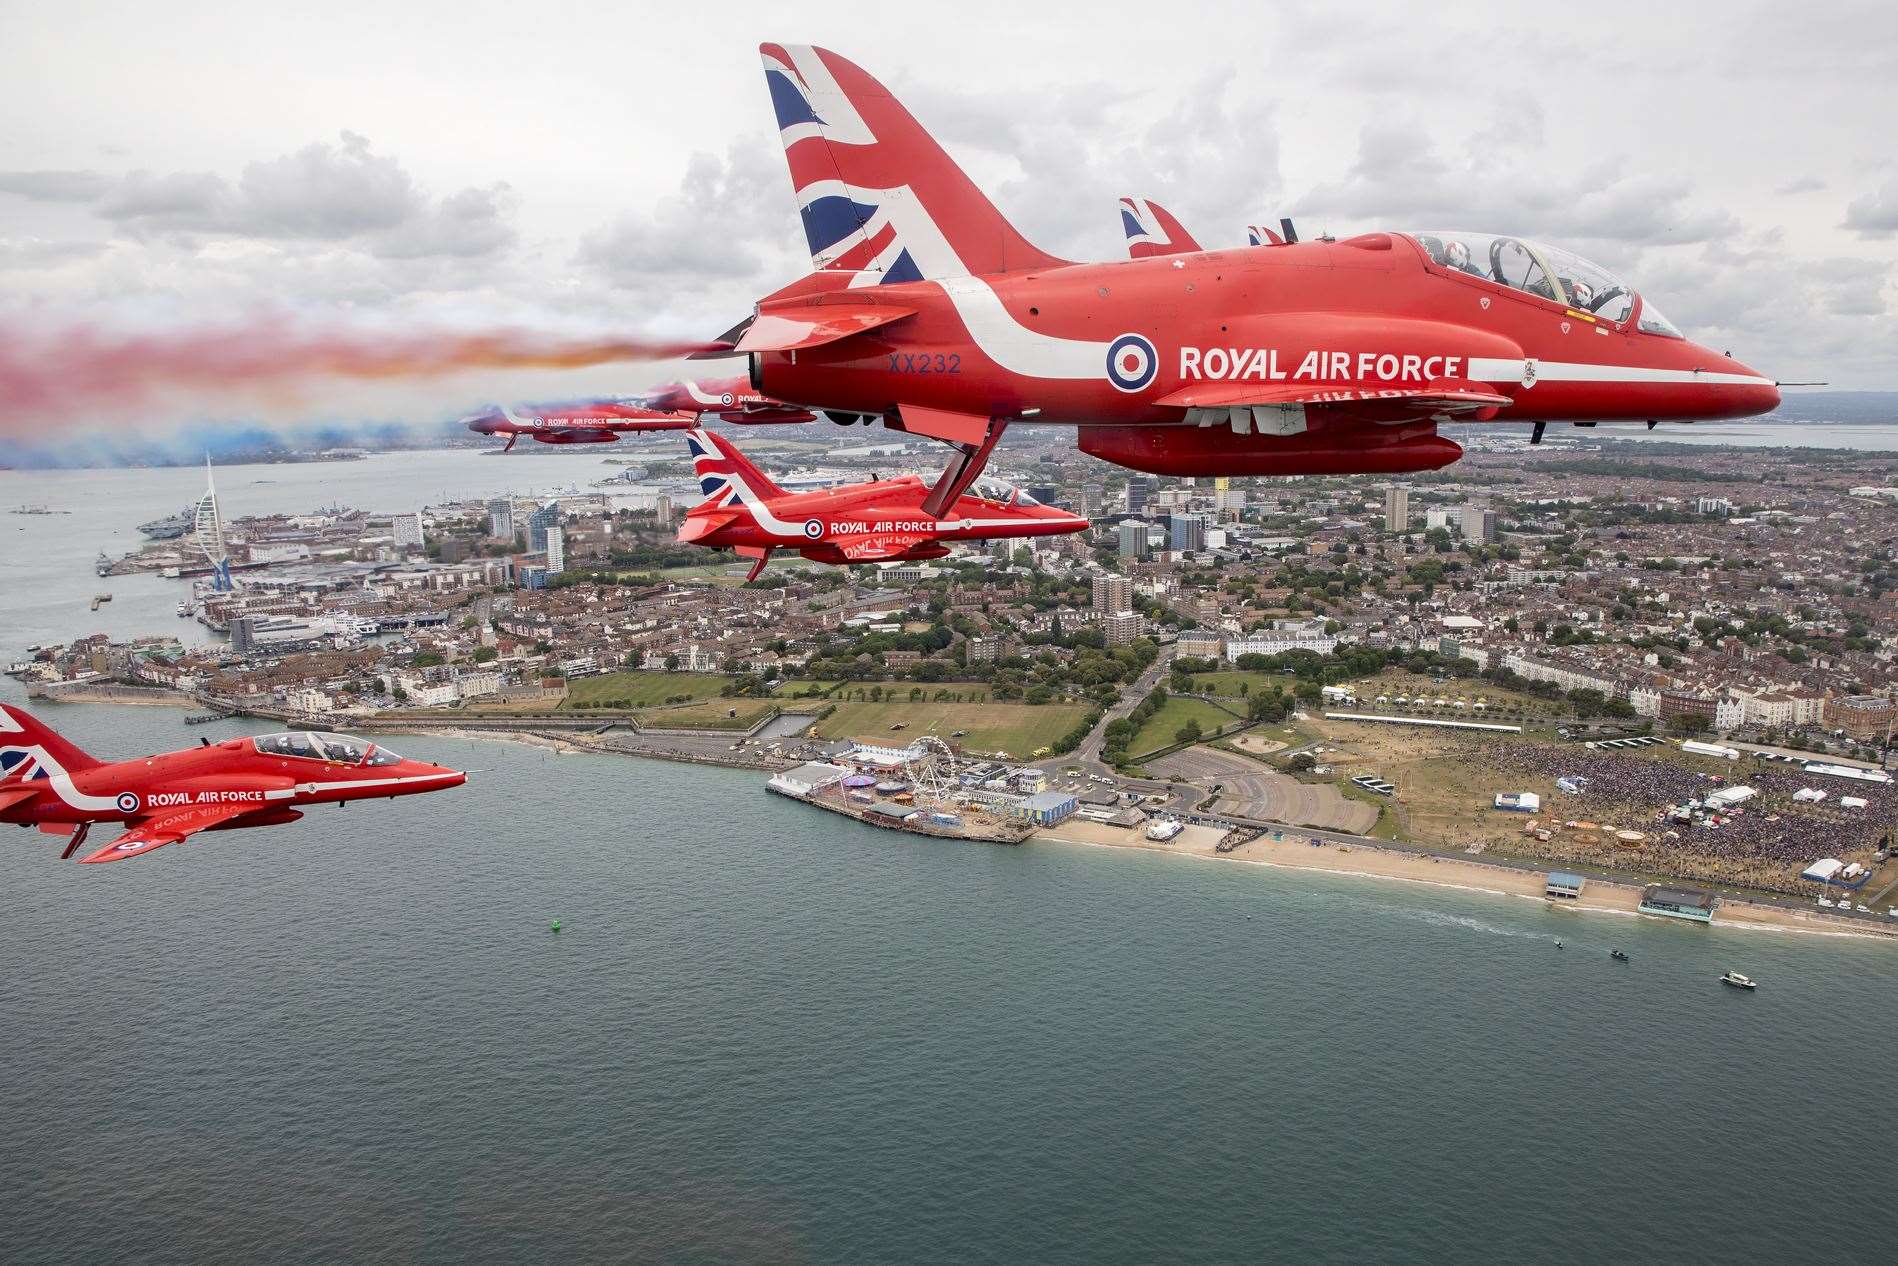 The Royal Air Force Aerobatic Team, The Red Arrows